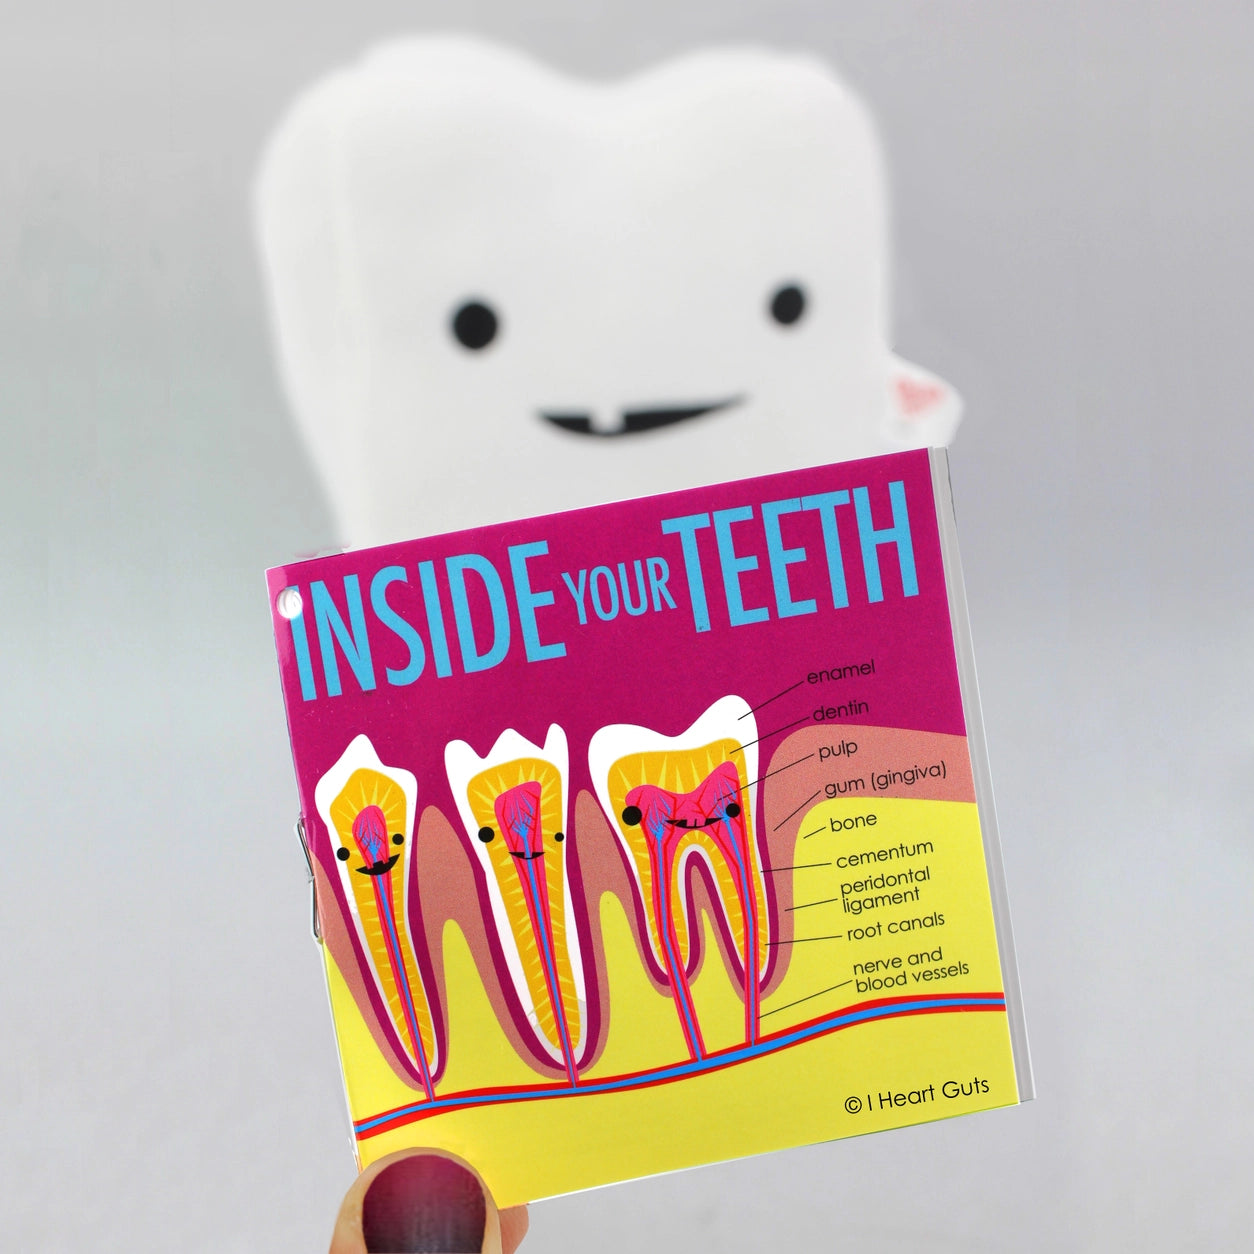 Knuffel tand - You can’t handle the tooth!